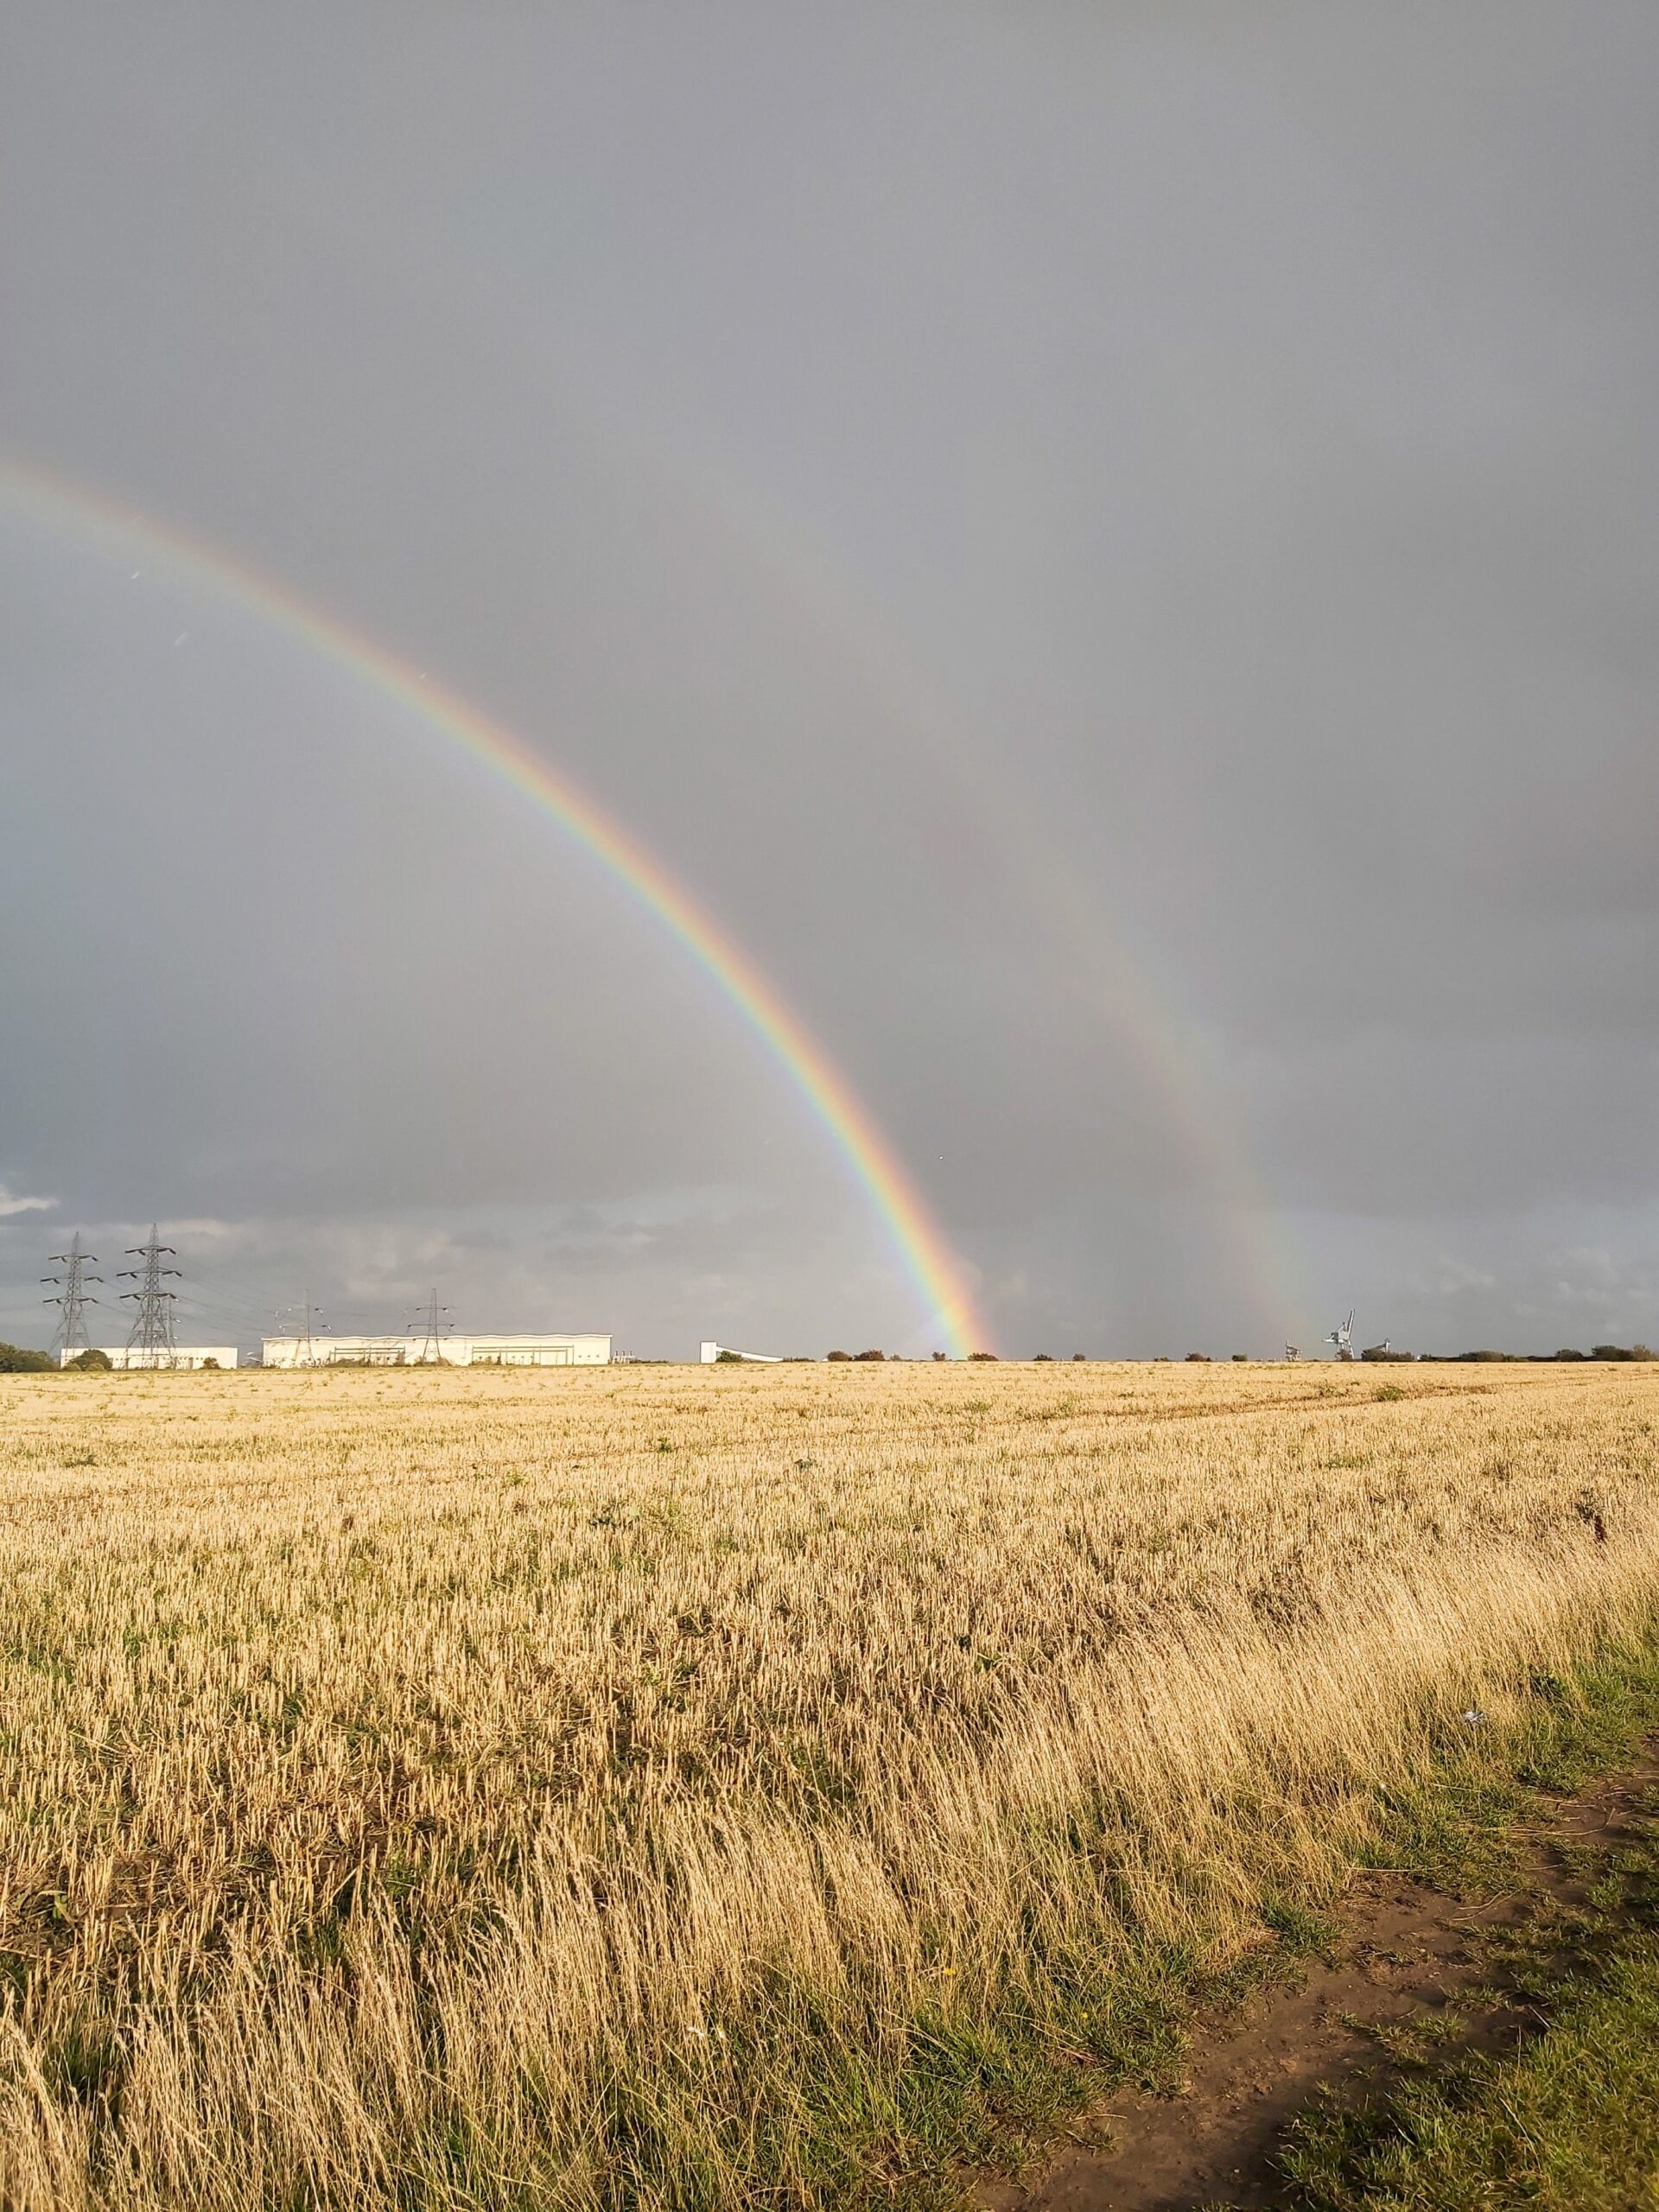 A double rainbow in Hoo, Medway, England